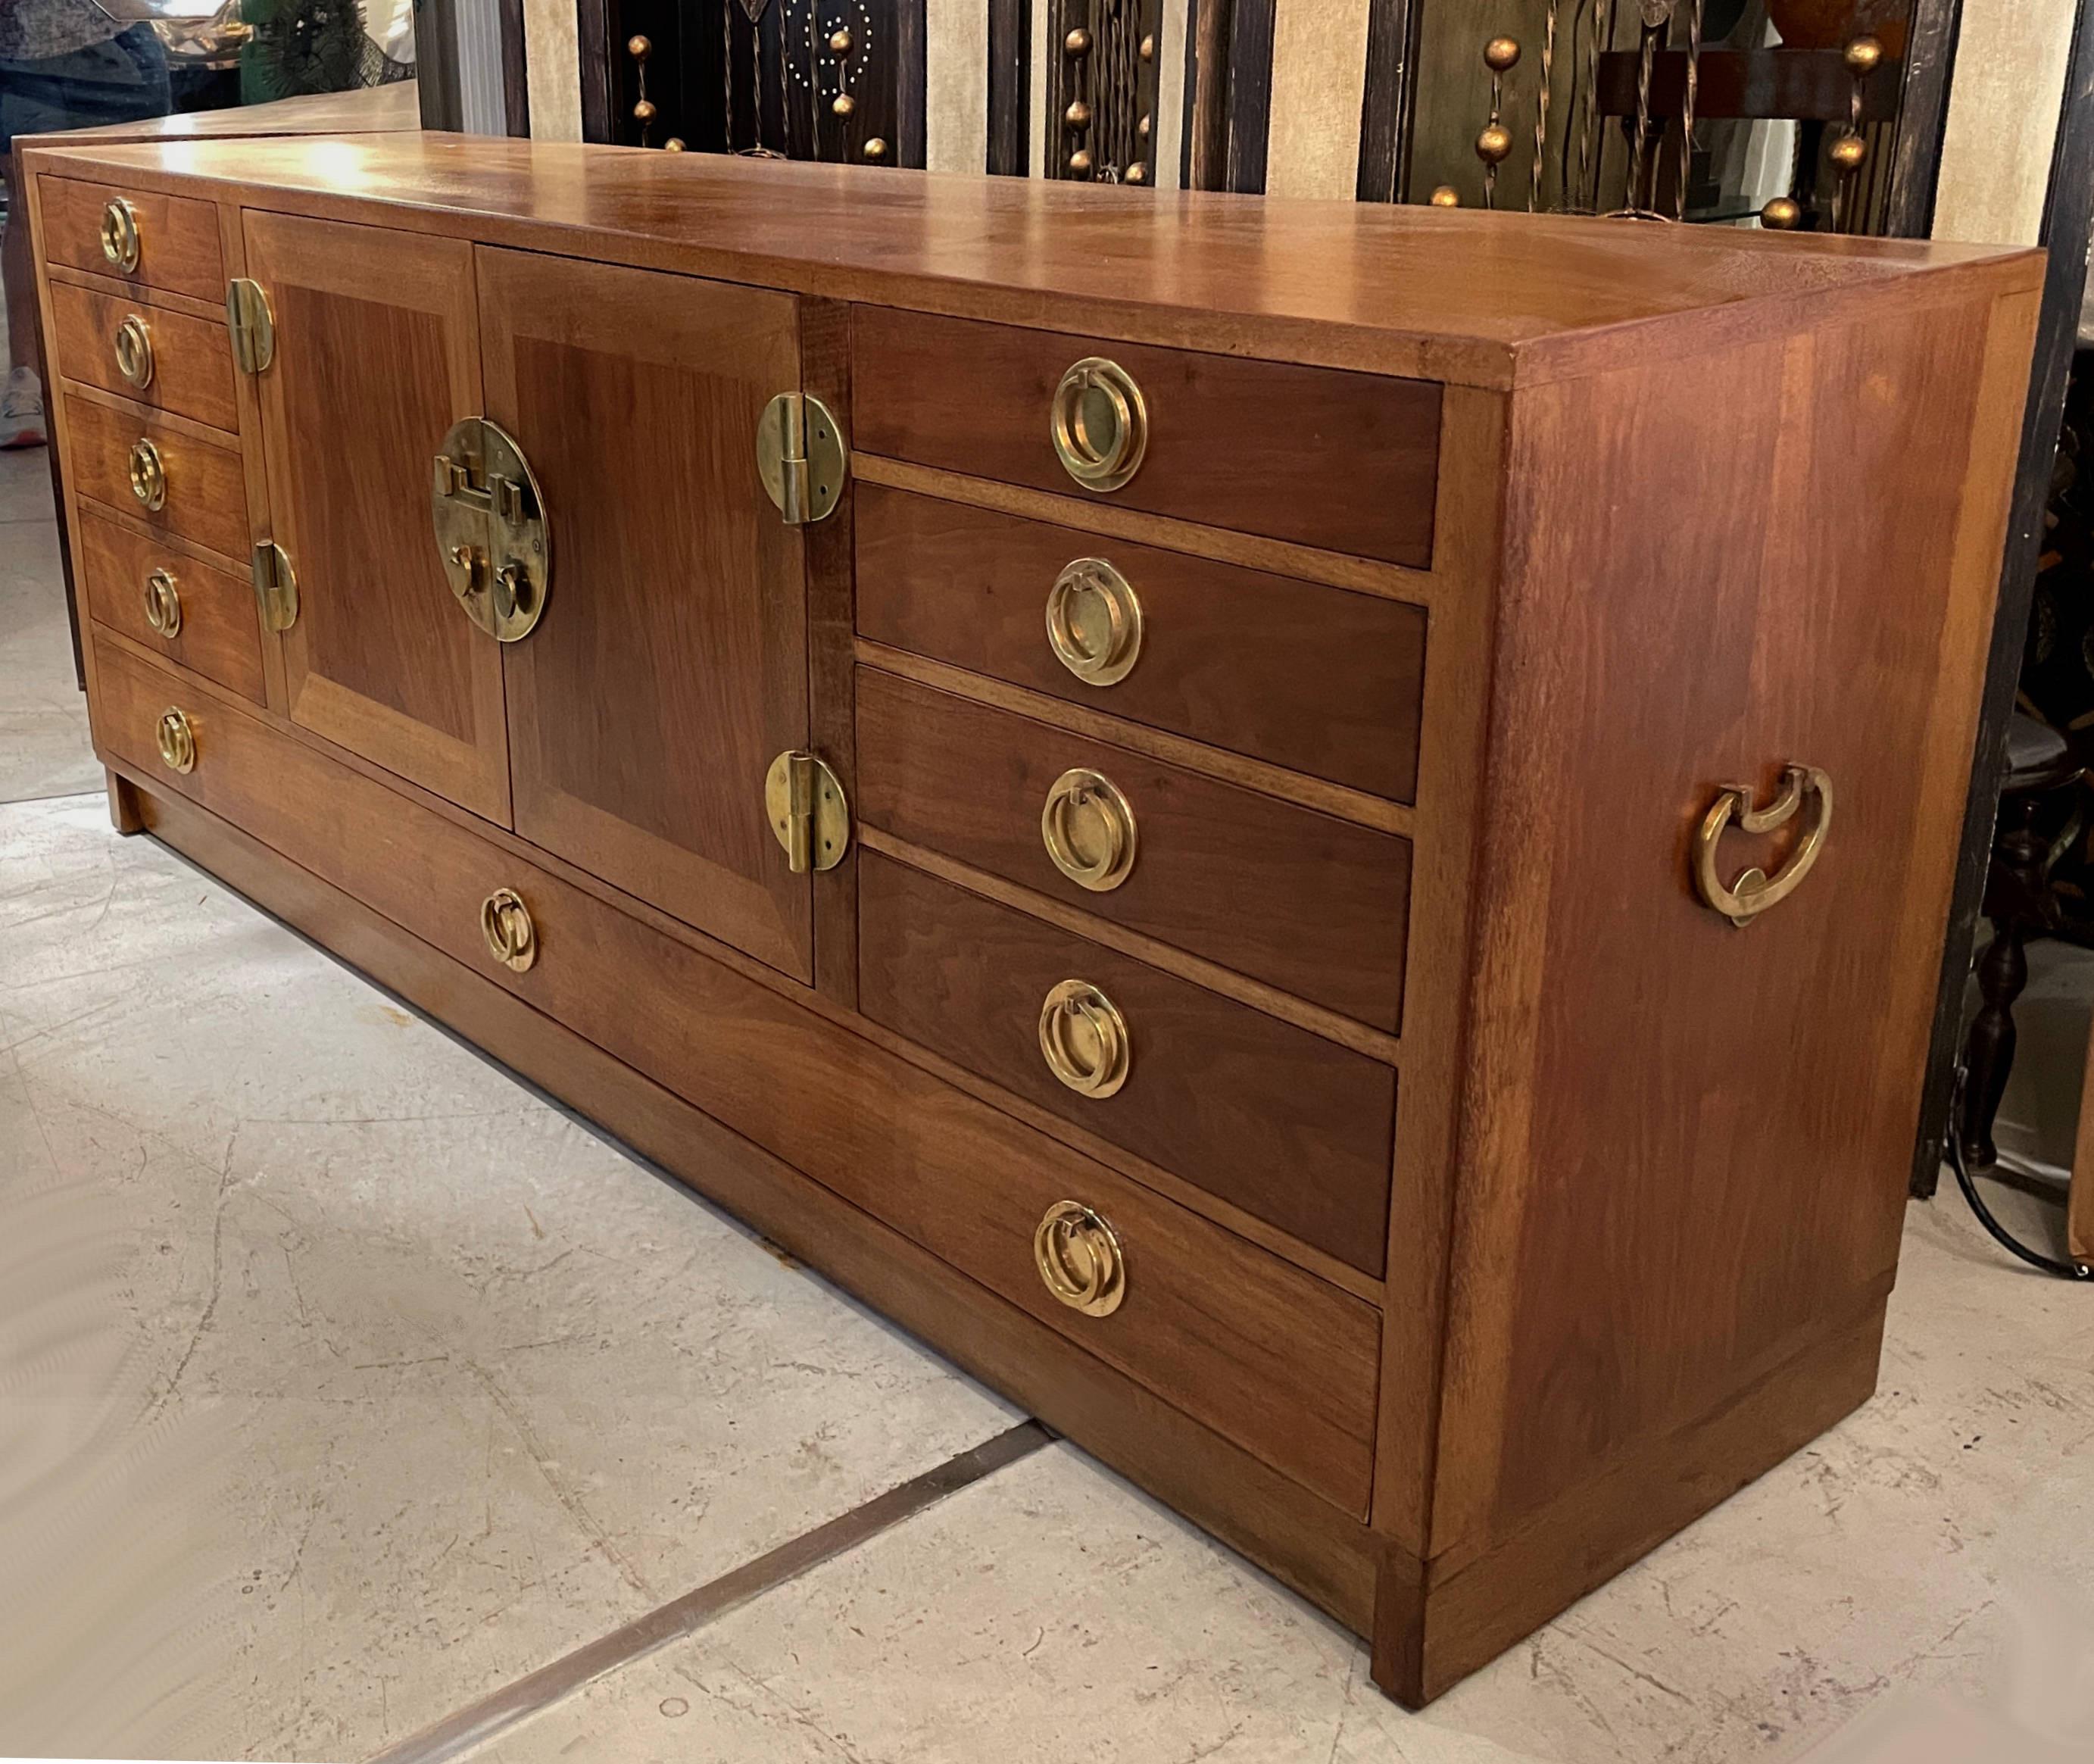 A warm Edward Wormley for Dunbar credenza in a beautiful mahogany wood with solid brass hardware. There are nine drawers with center cabinet. The quality of the construction is very sturdy and of fine materials in very good condition.